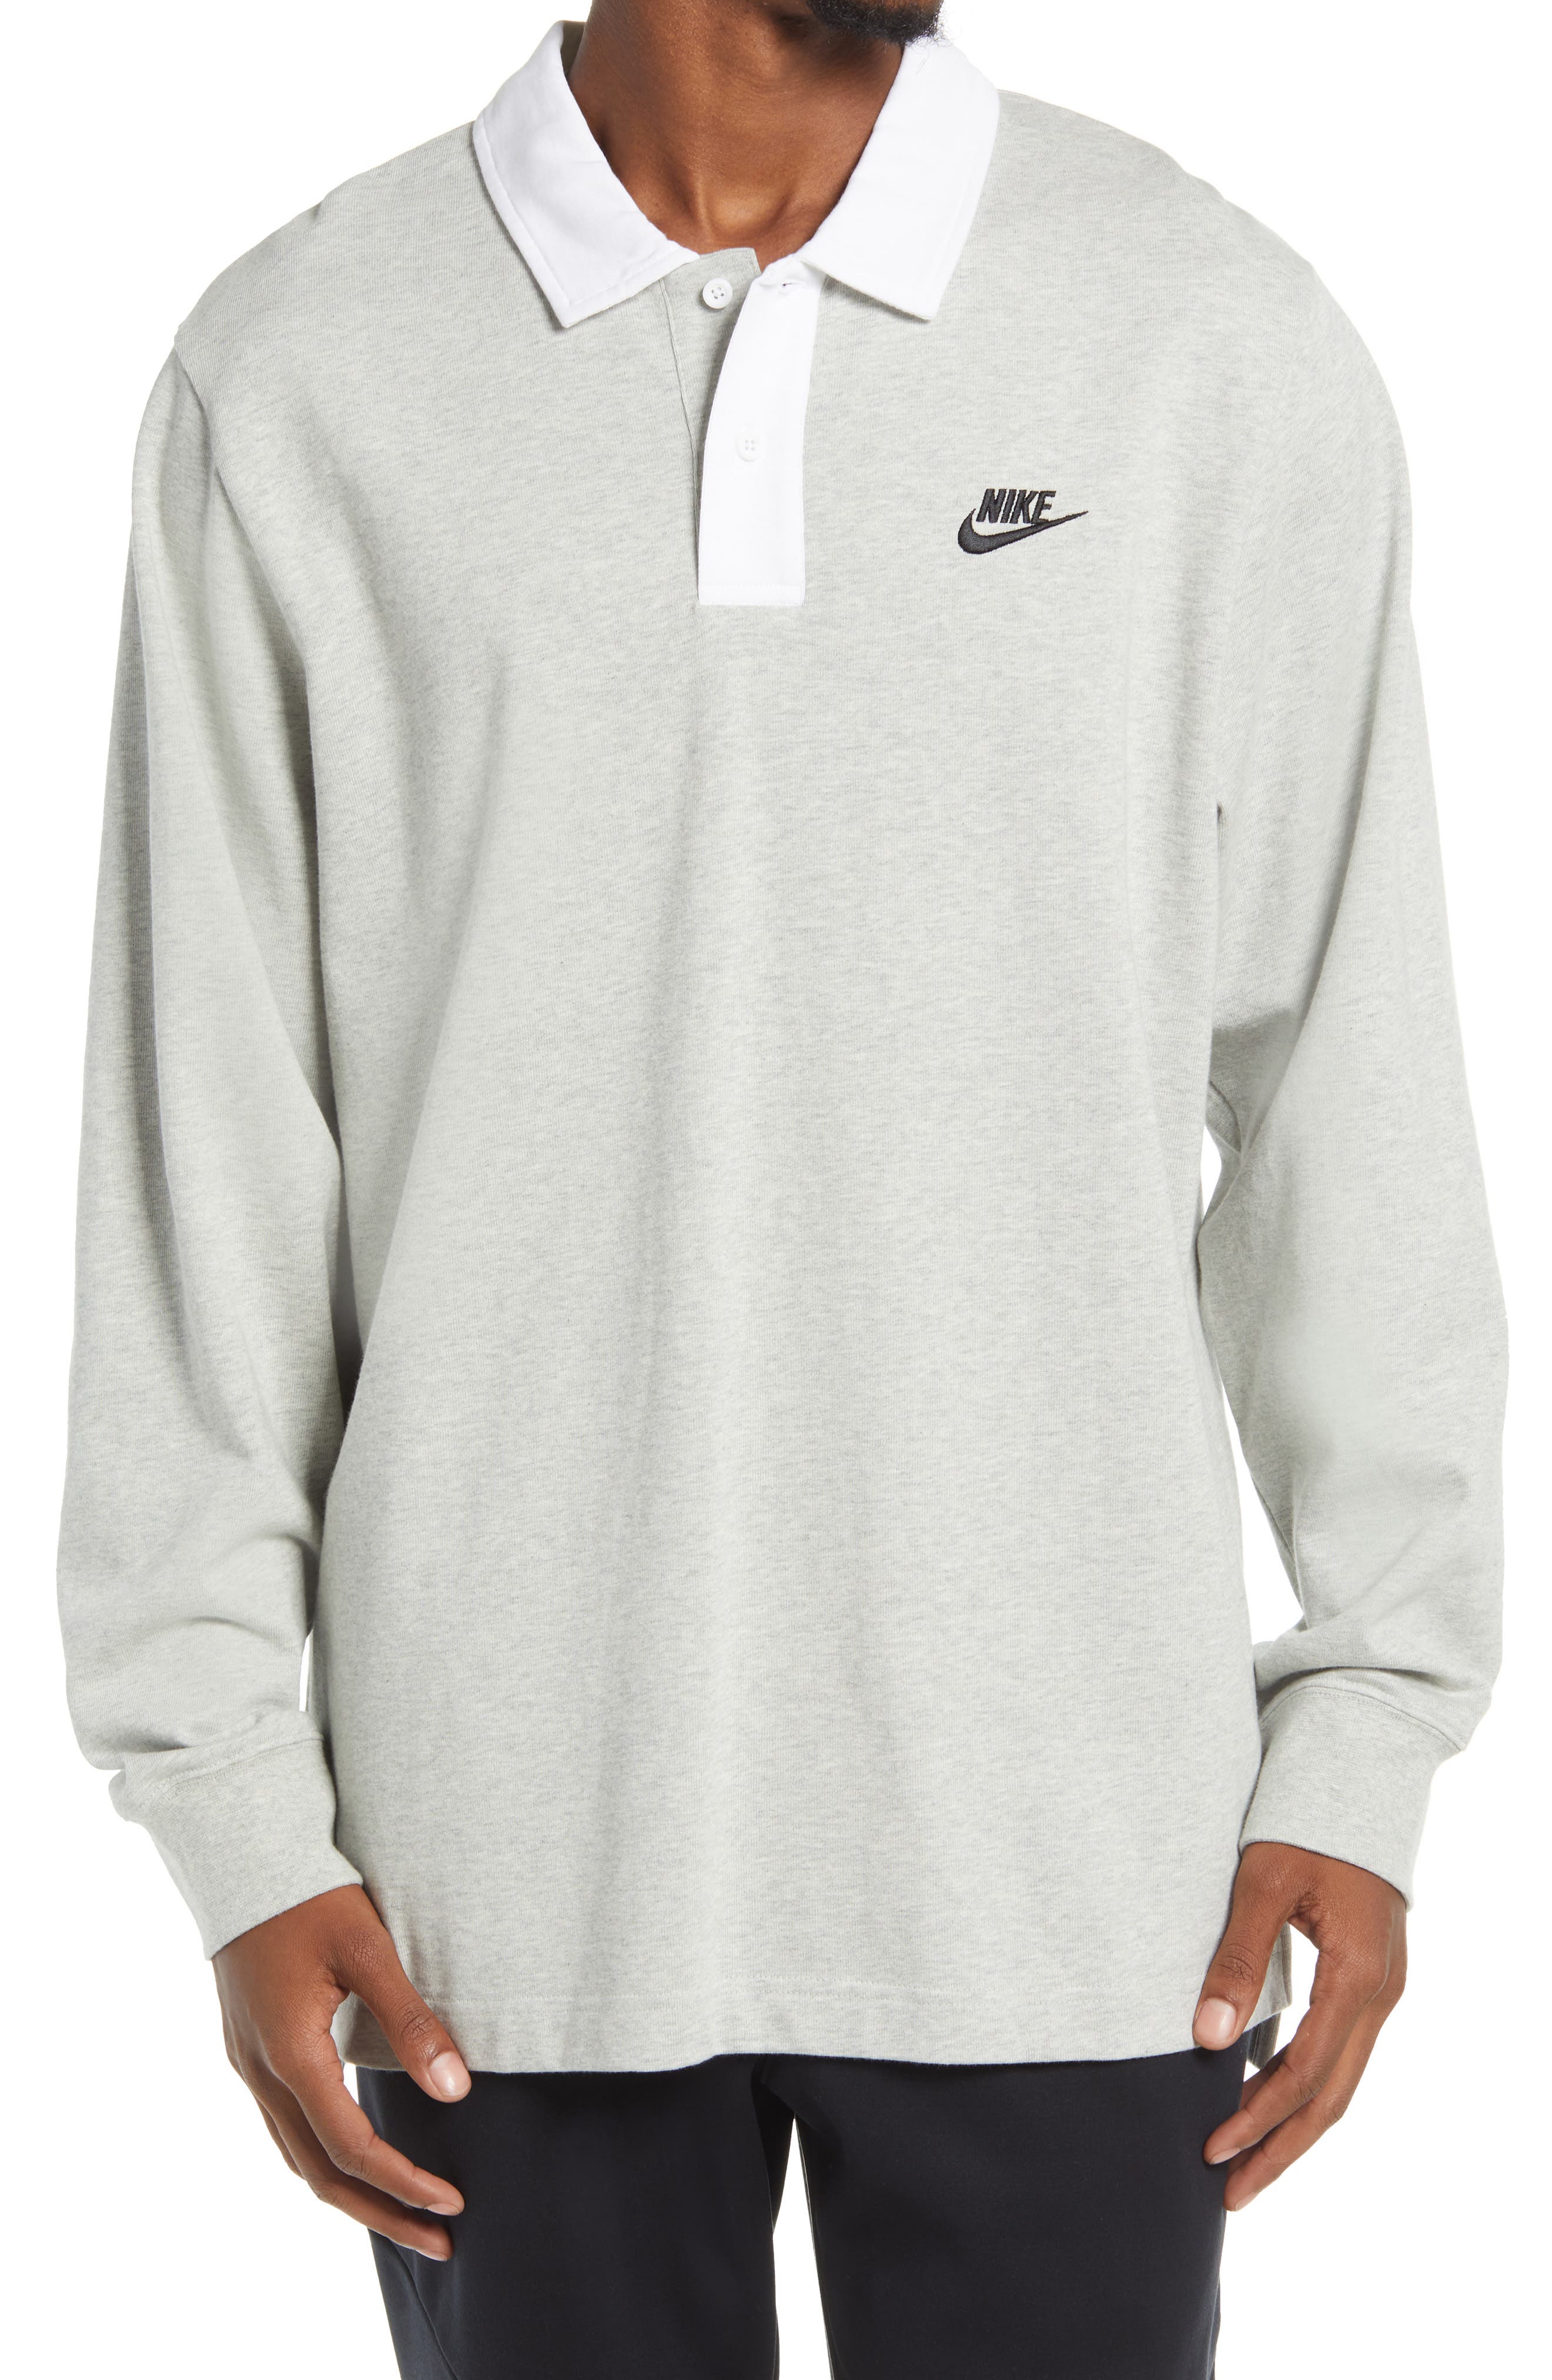 NIKE Sportswear Trend Embroidered Long Sleeve Polo in Grey Heather/white/Black